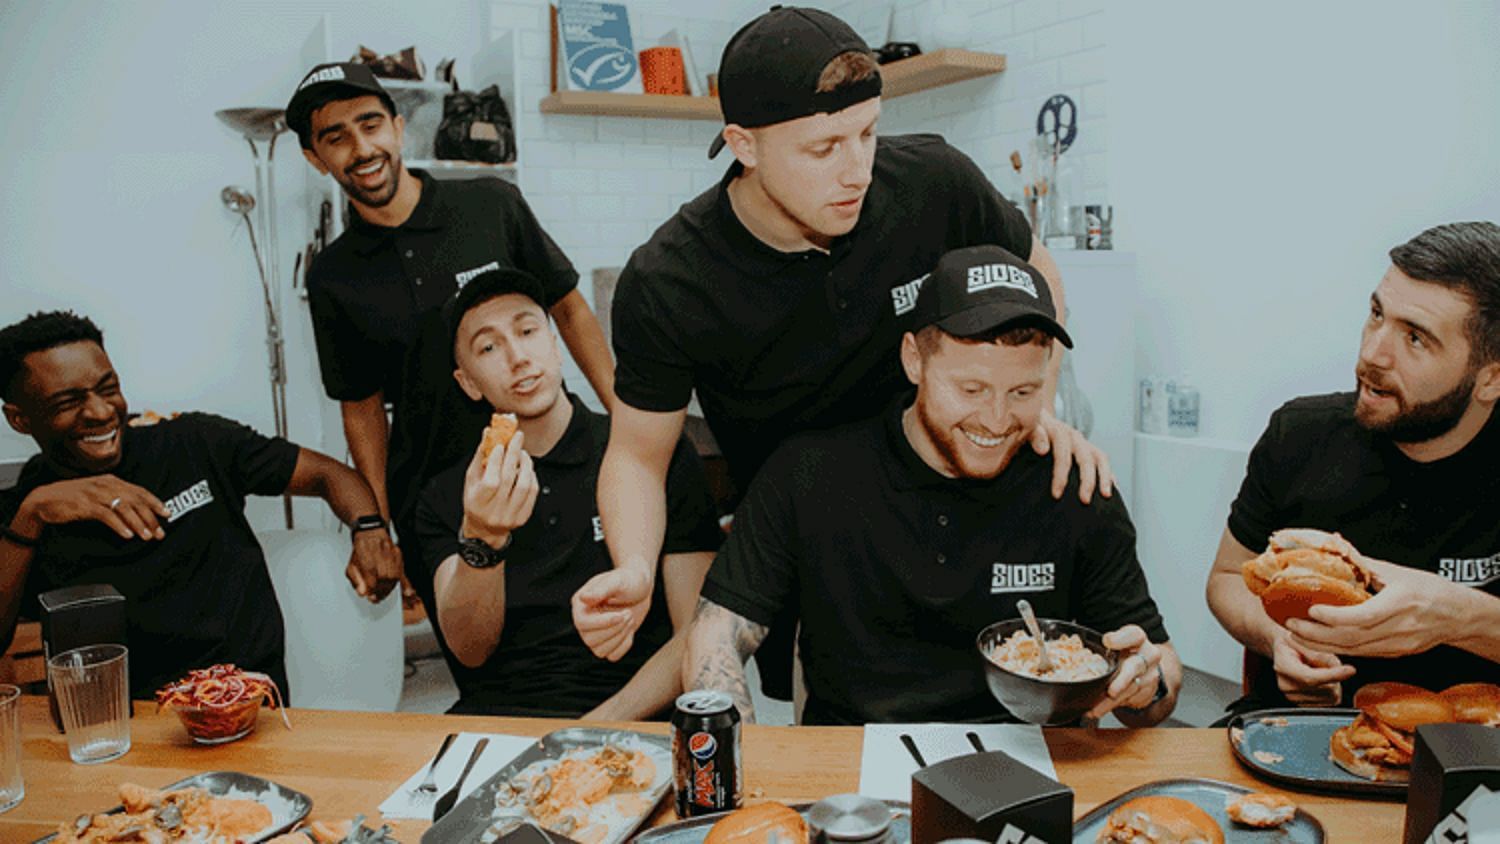 Vikram pictured with the rest of the Sidemen with their Sides food (Image via Restaurantonline.co.uk)